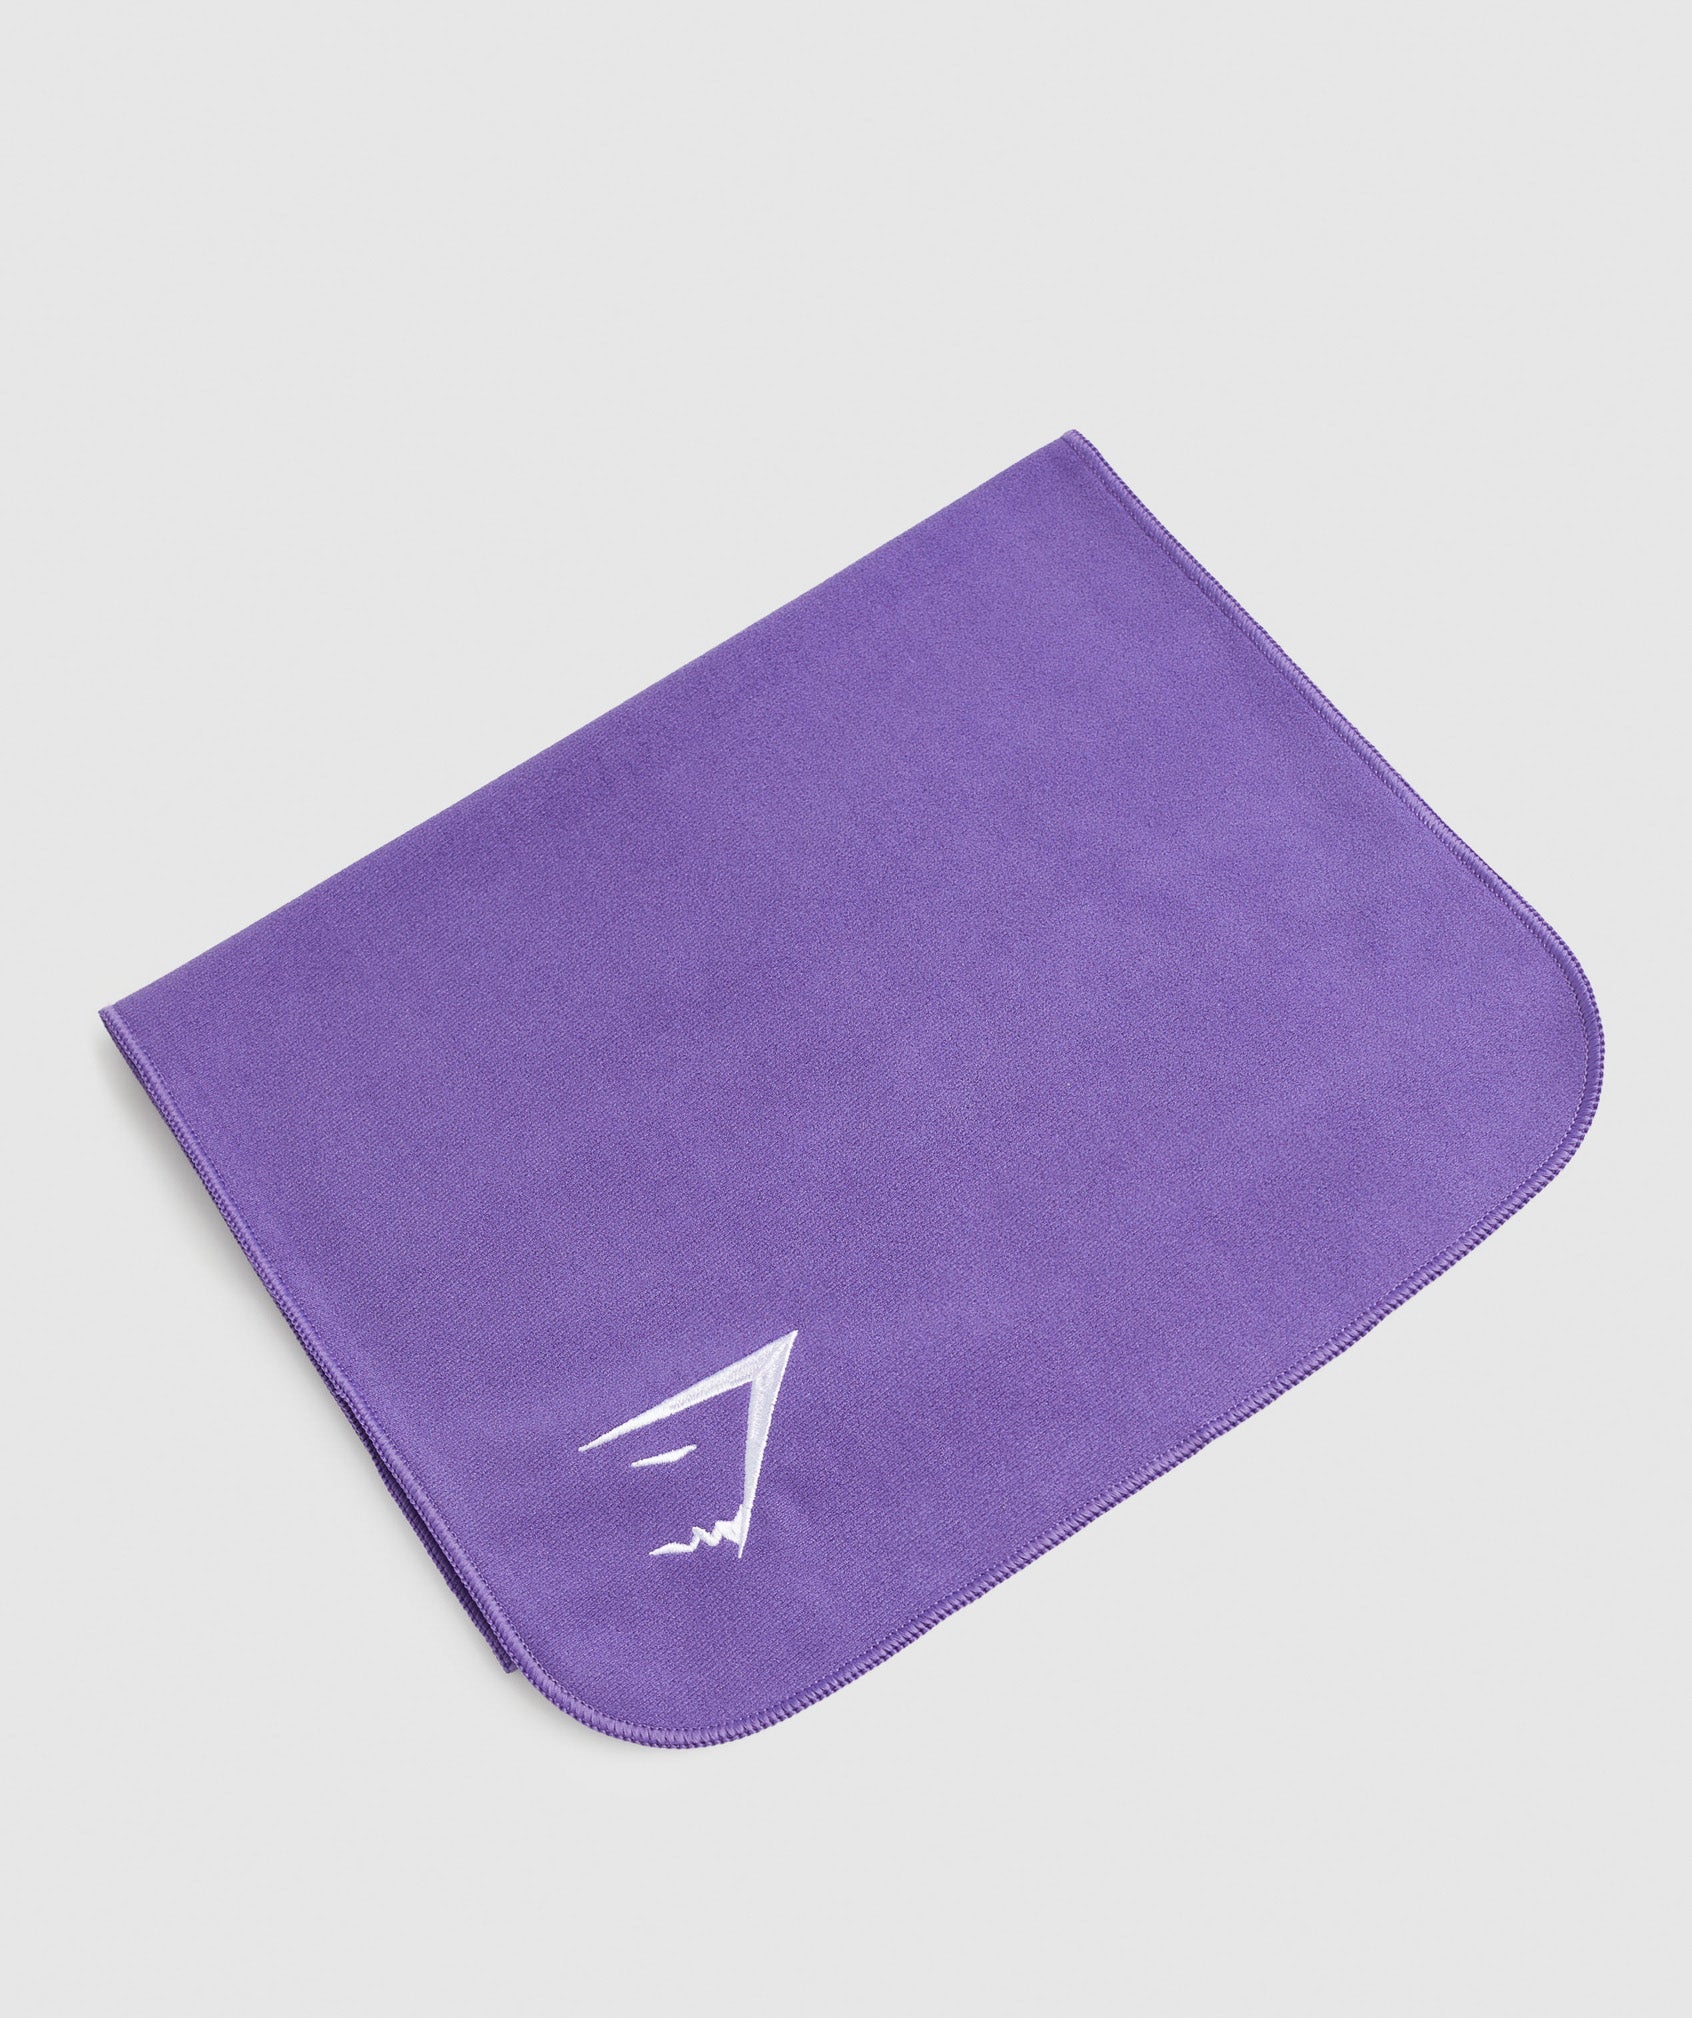 Sweat Towel in {{variantColor} is out of stock